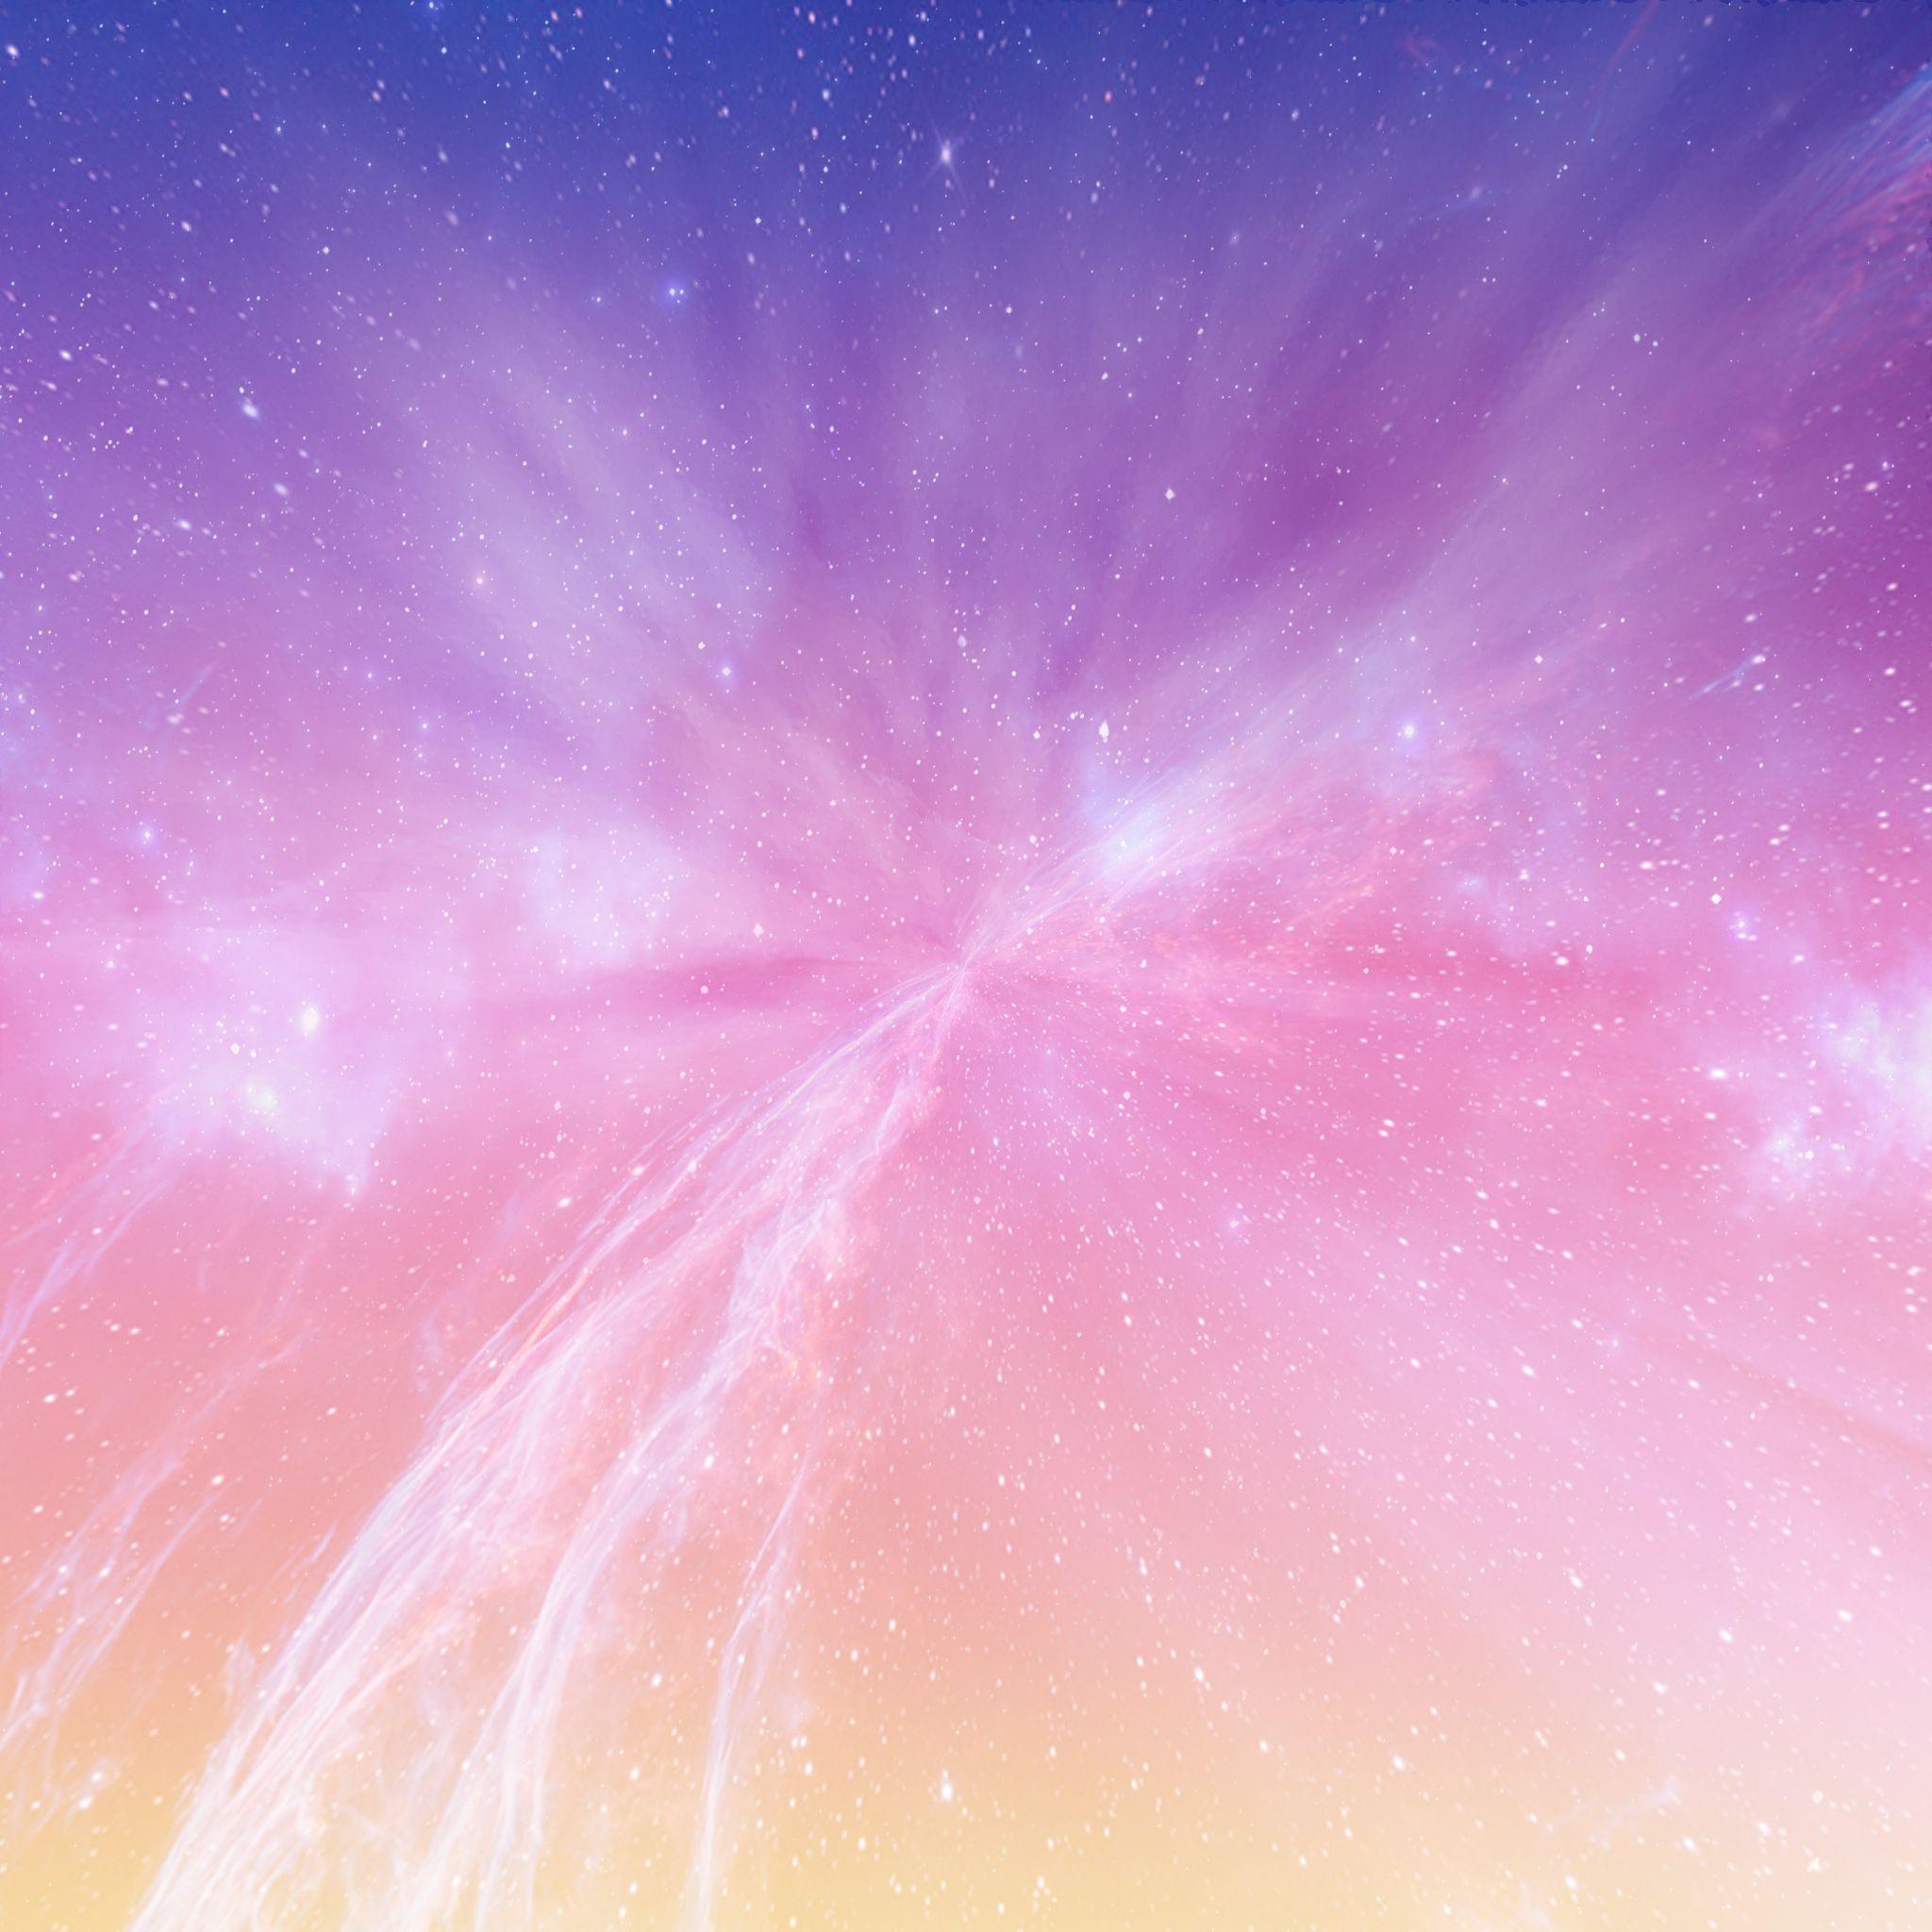 Free Vector  Galaxy iphone wallpaper mobile background cute space vector